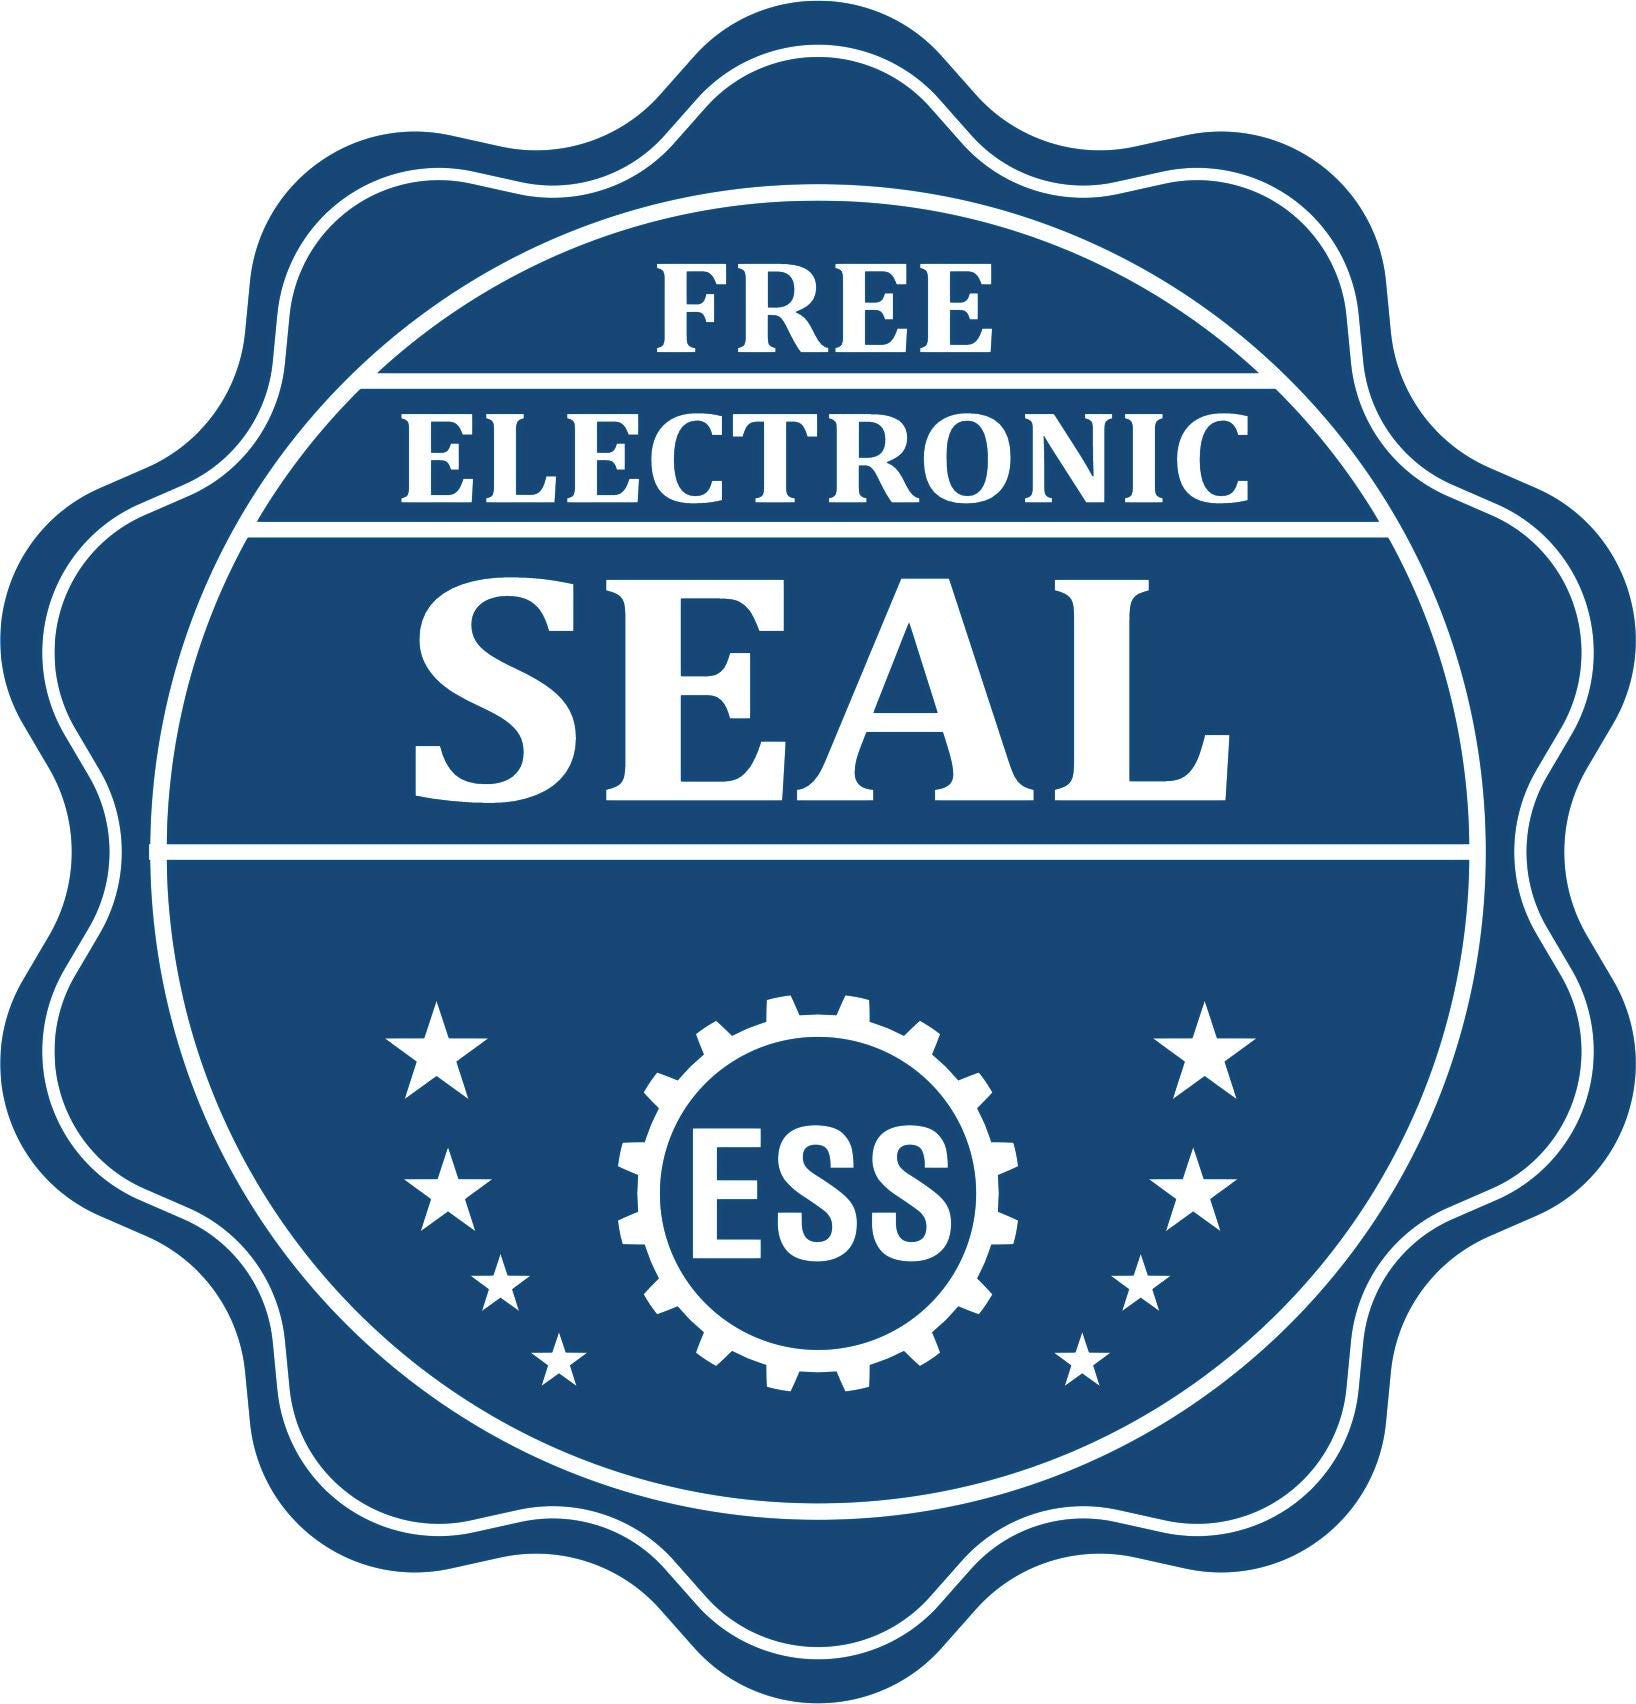 A badge showing a free electronic seal for the Slim Pre-Inked New Hampshire Professional Engineer Seal Stamp with stars and the ESS gear on the emblem.